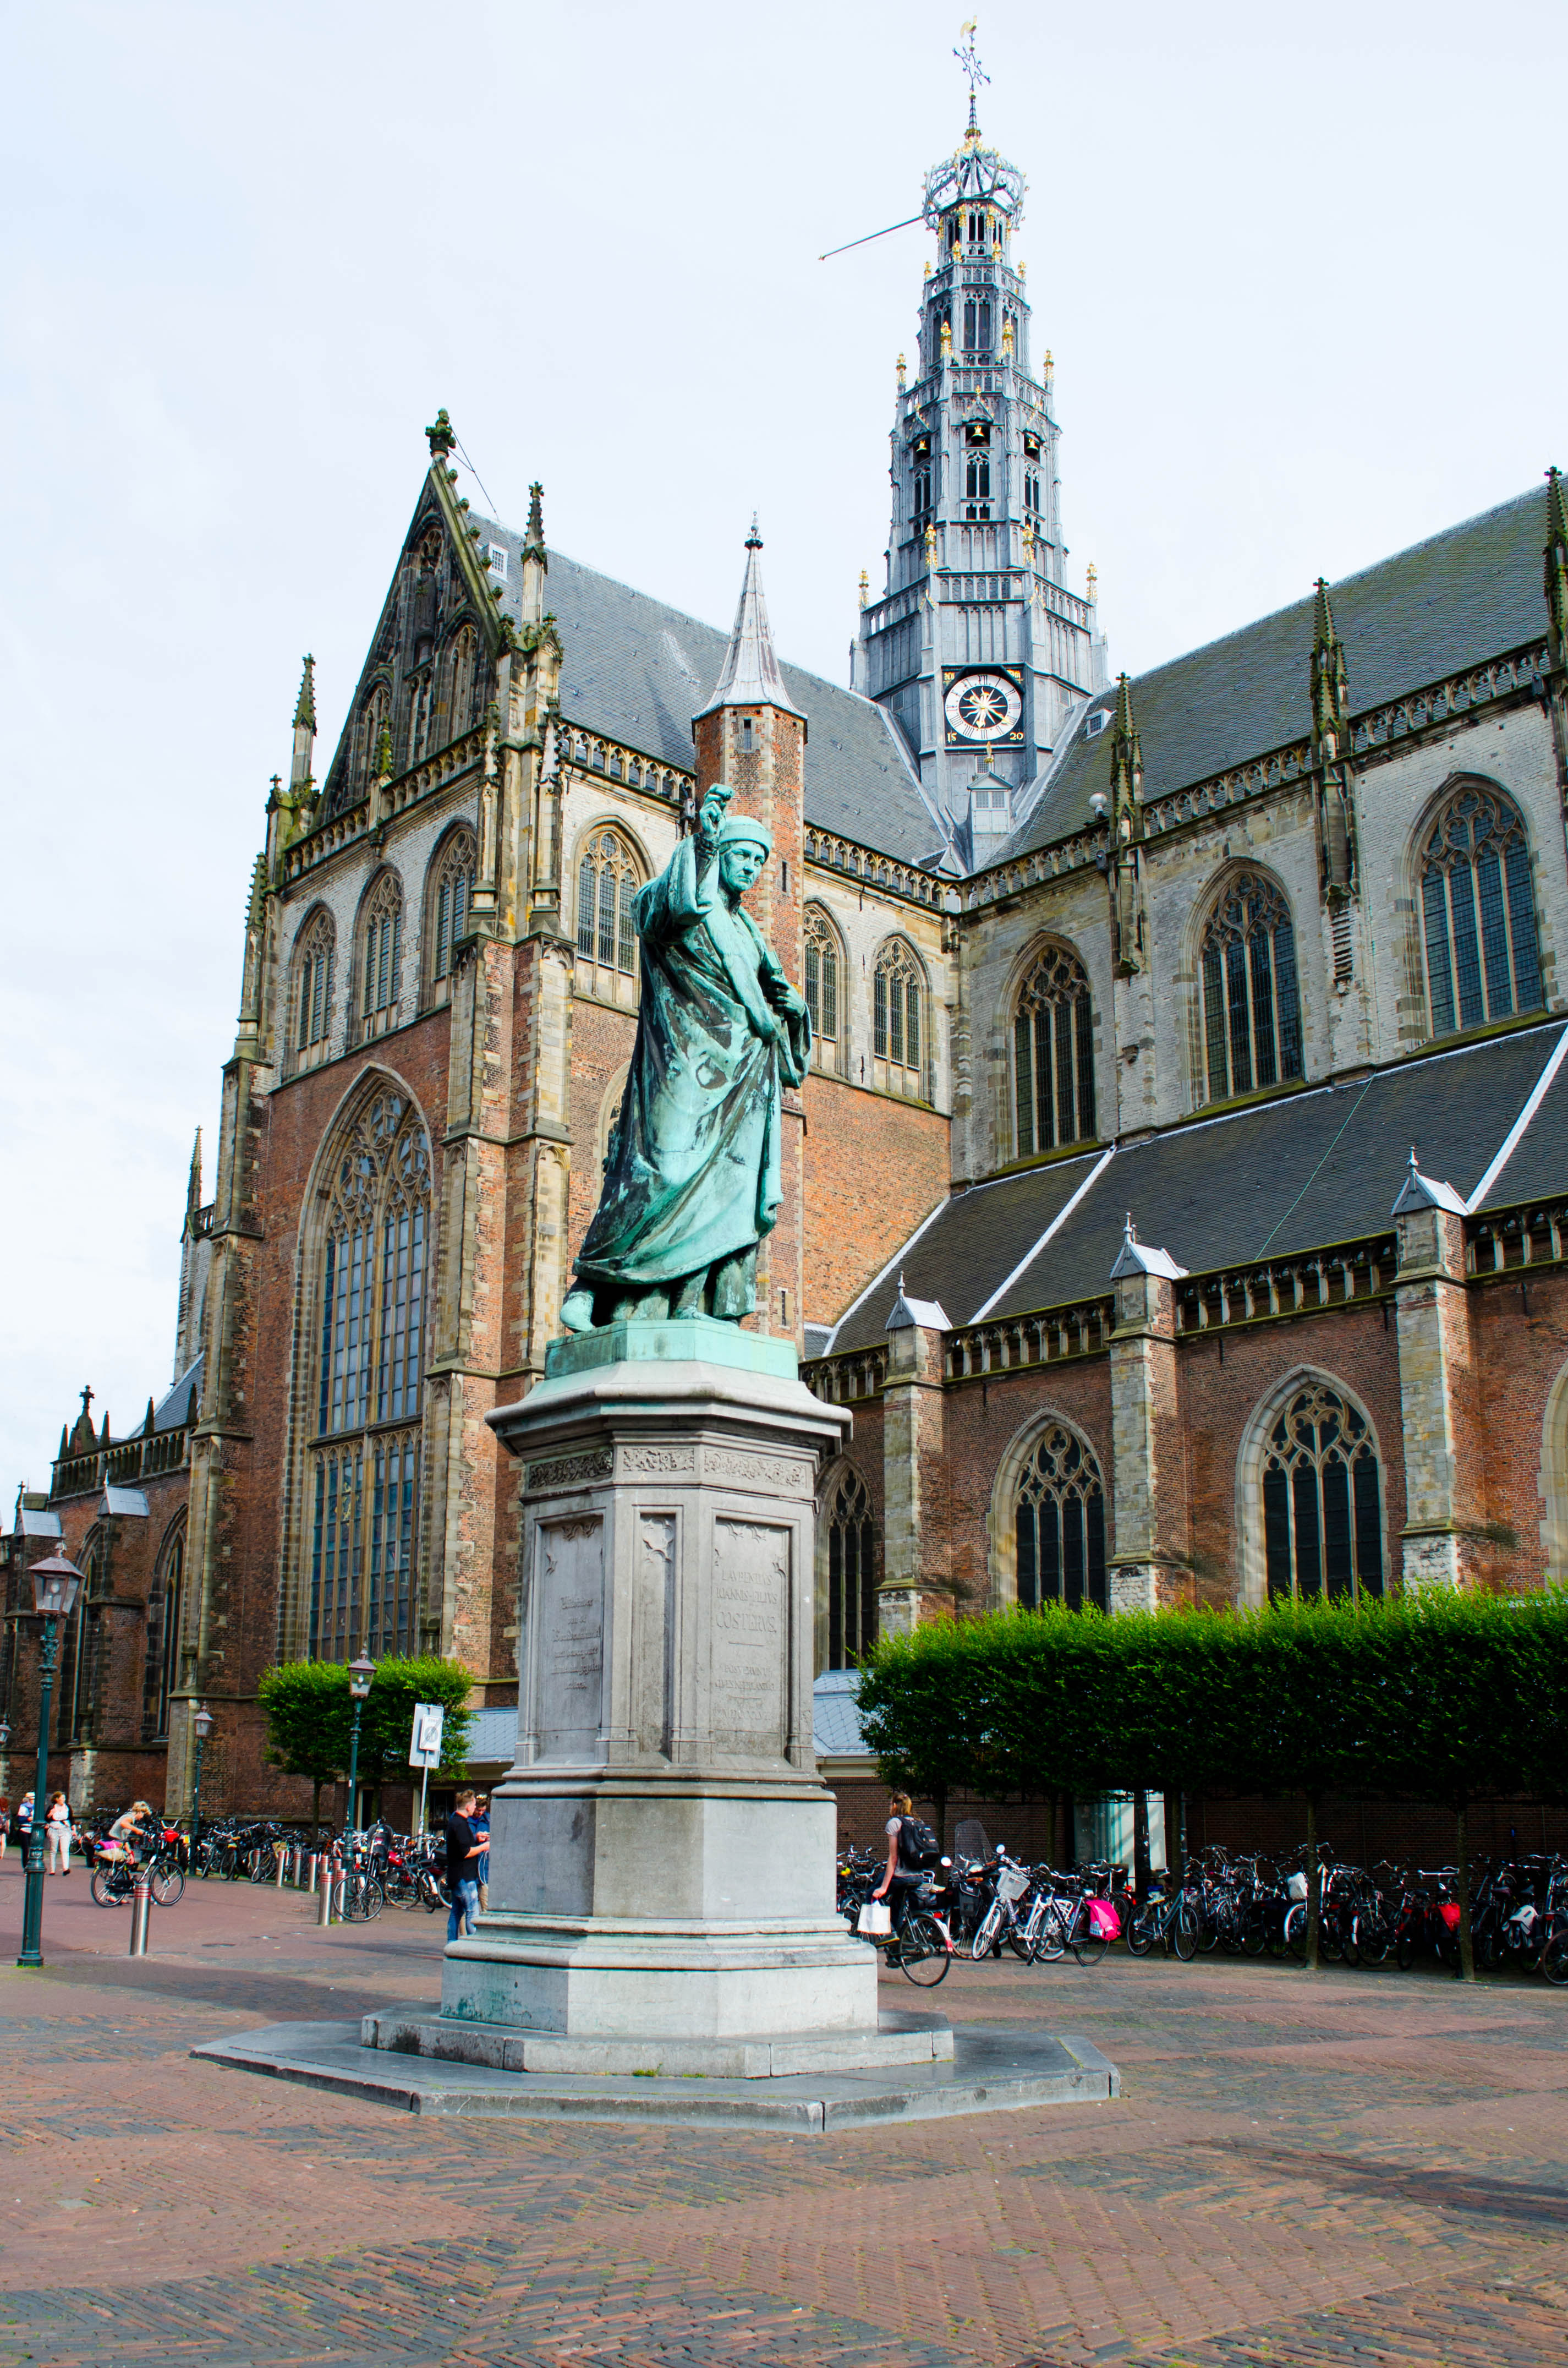 The breathtaking Cathedral of Saint Bavo in Haarlem, the Netherlands